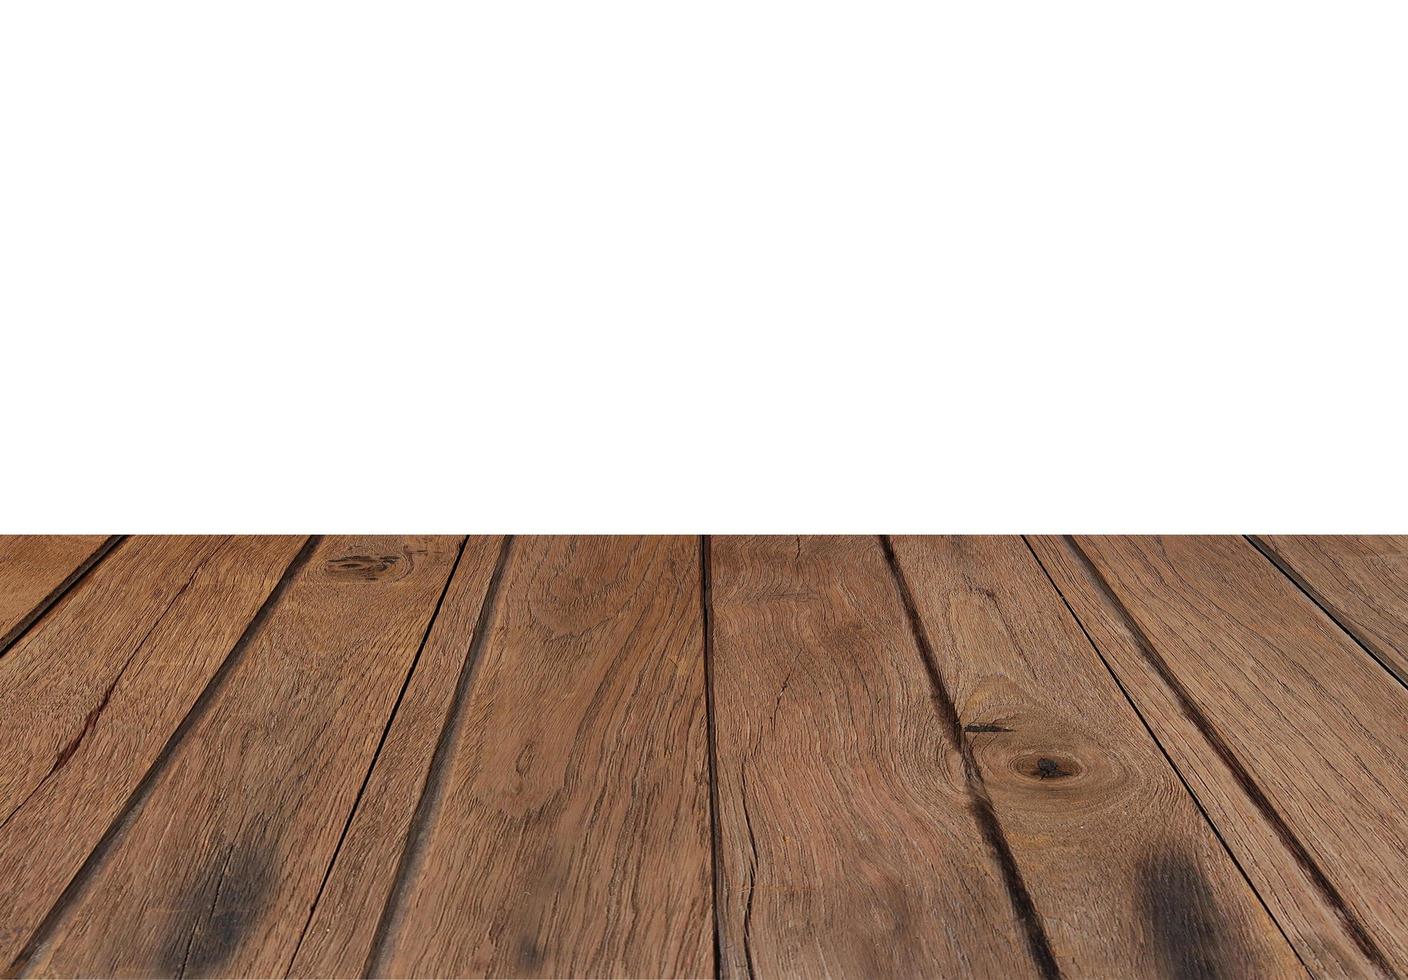 Rustic wood table on white photo